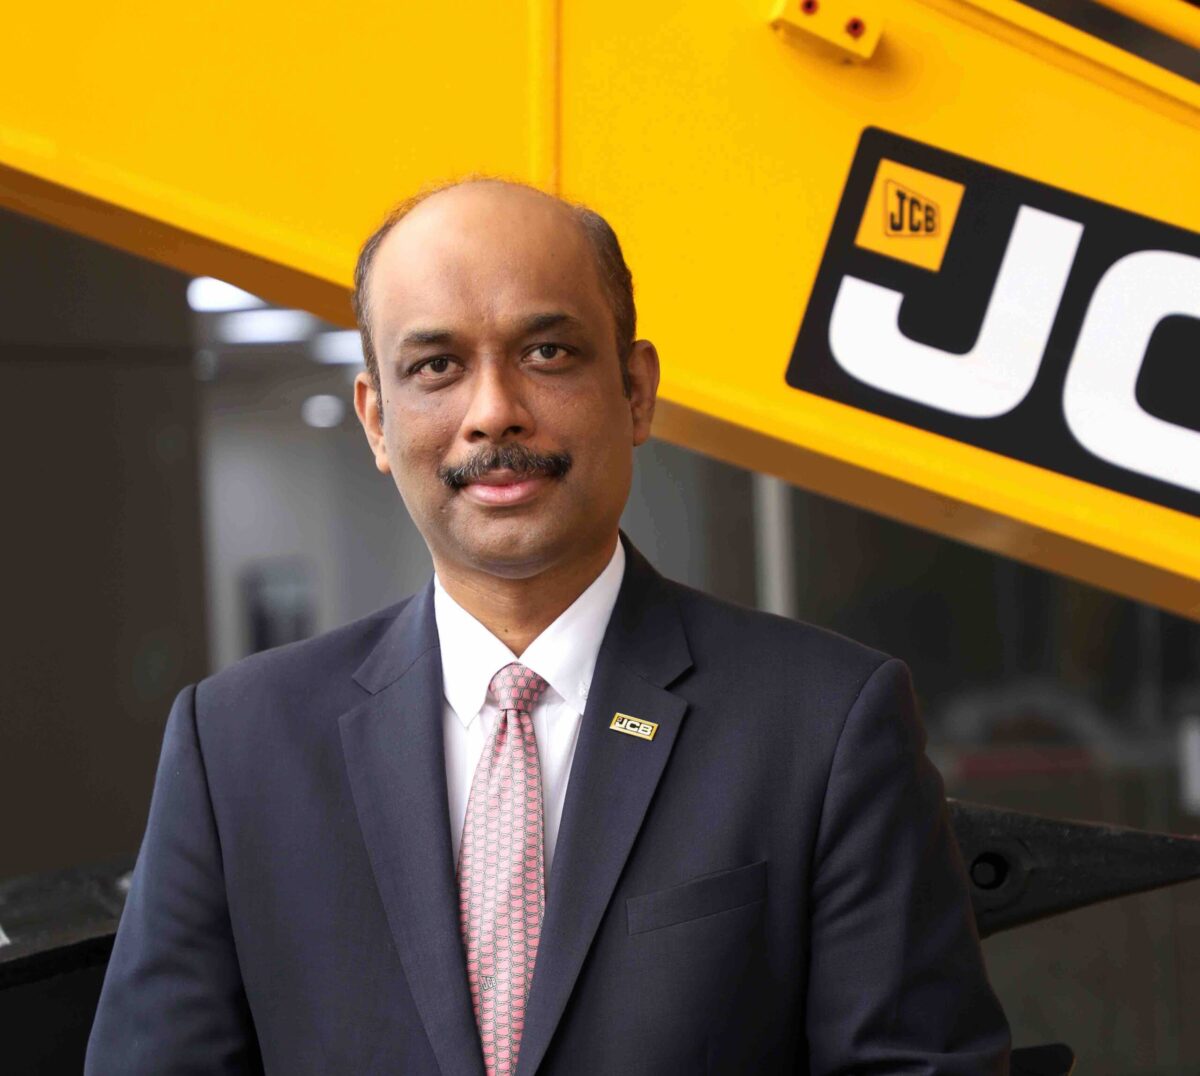 JCB hydrogen machine makes trade show debut at Excon